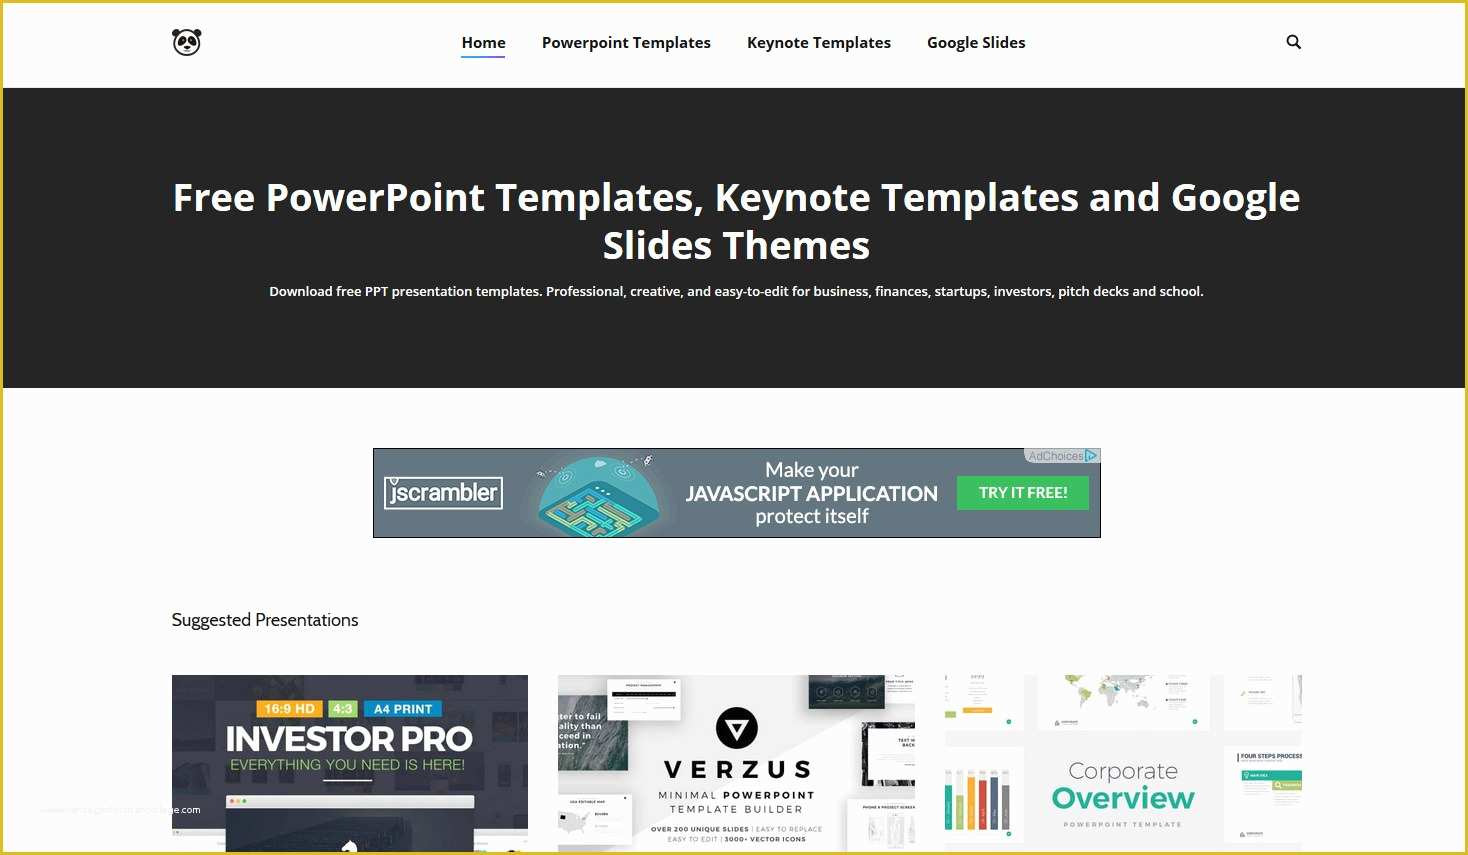 Free Google Templates Of 4 Sites with Free Beautiful Powerpoint Templates Keynotes